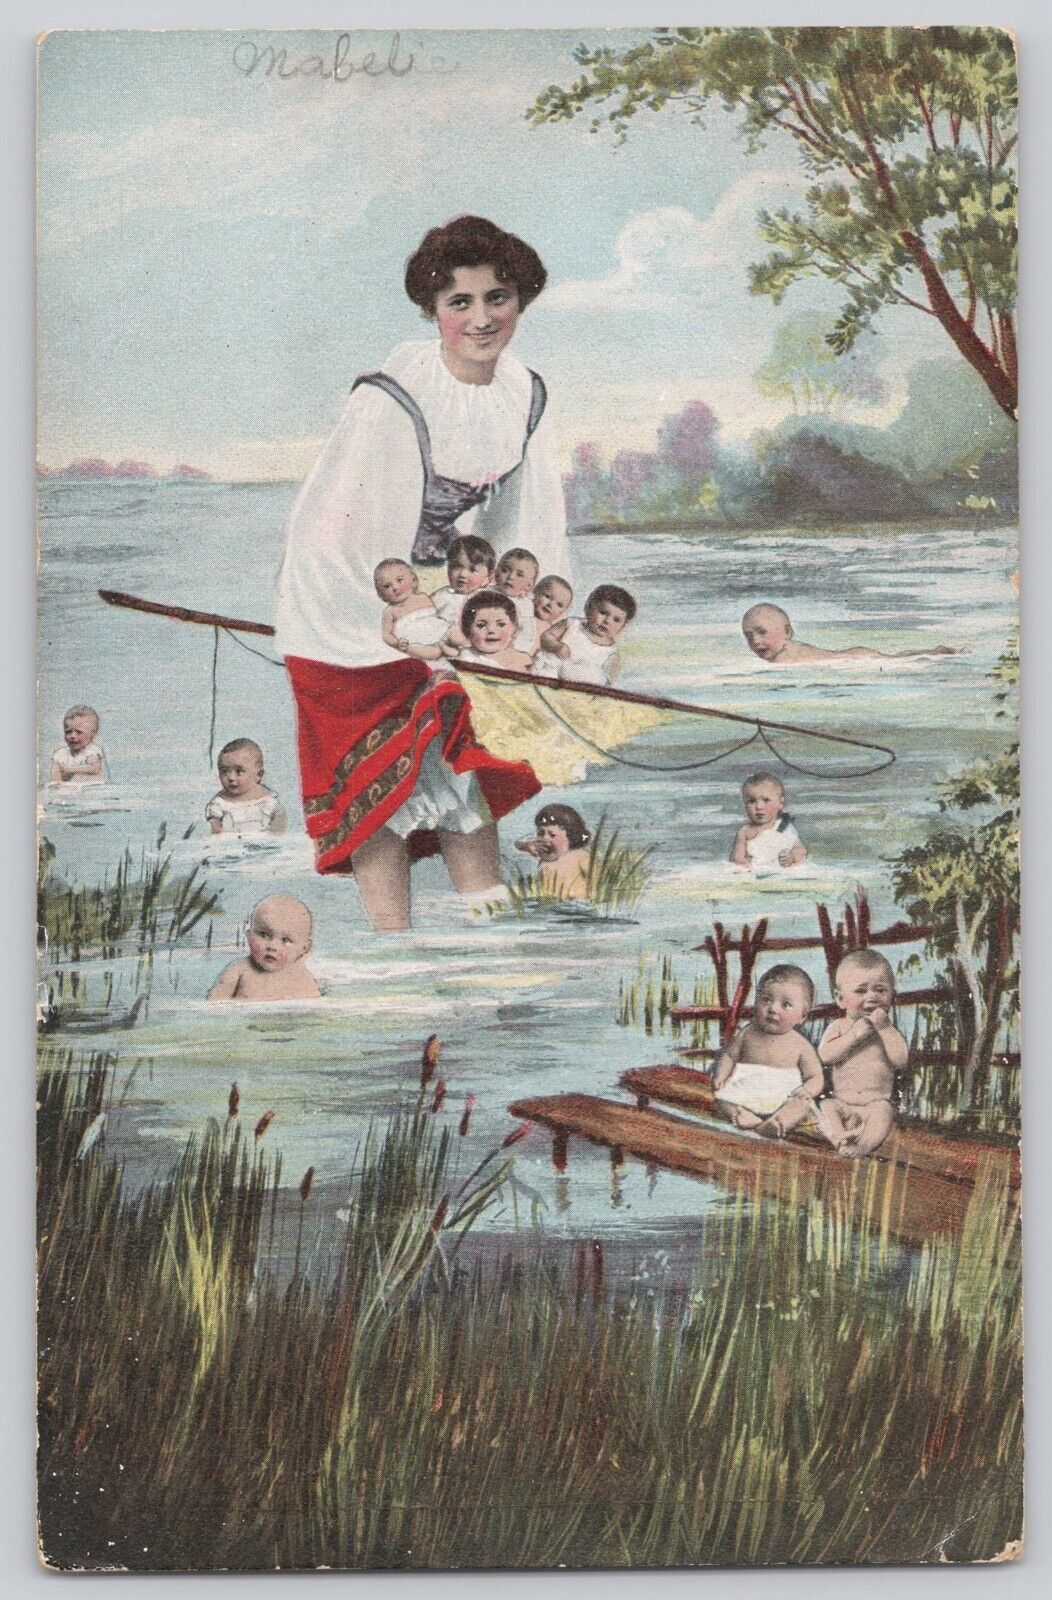 Weird Fantasy Postcard Woman Fishing in a Lake filled with Babies Posted 1907